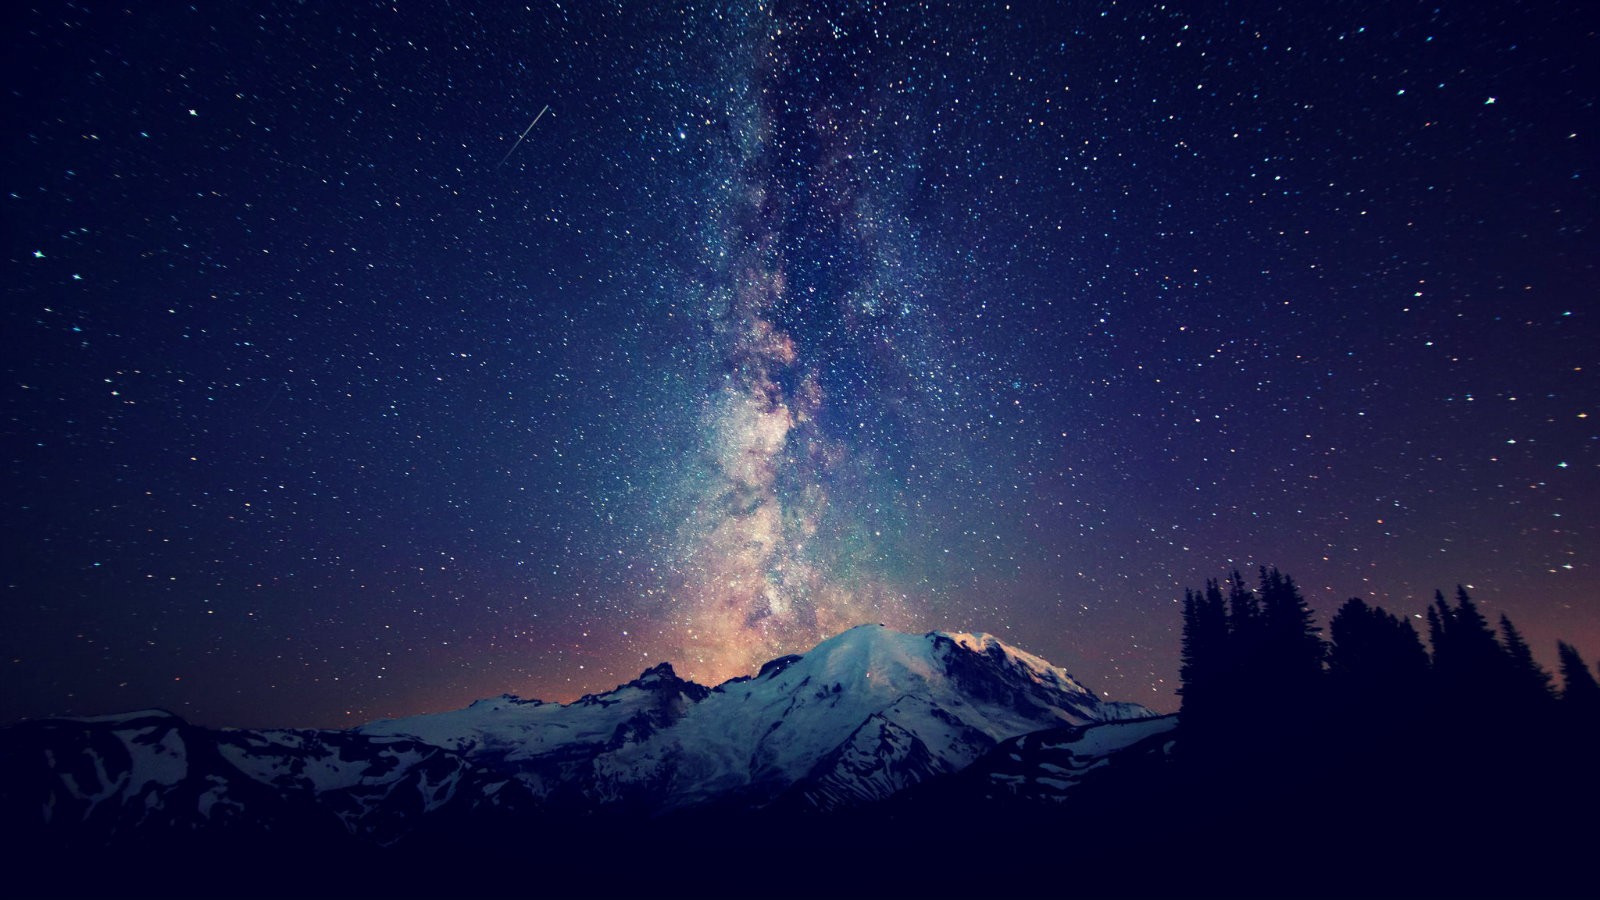 The Milky Way In Night Sky Wallpaper And Image